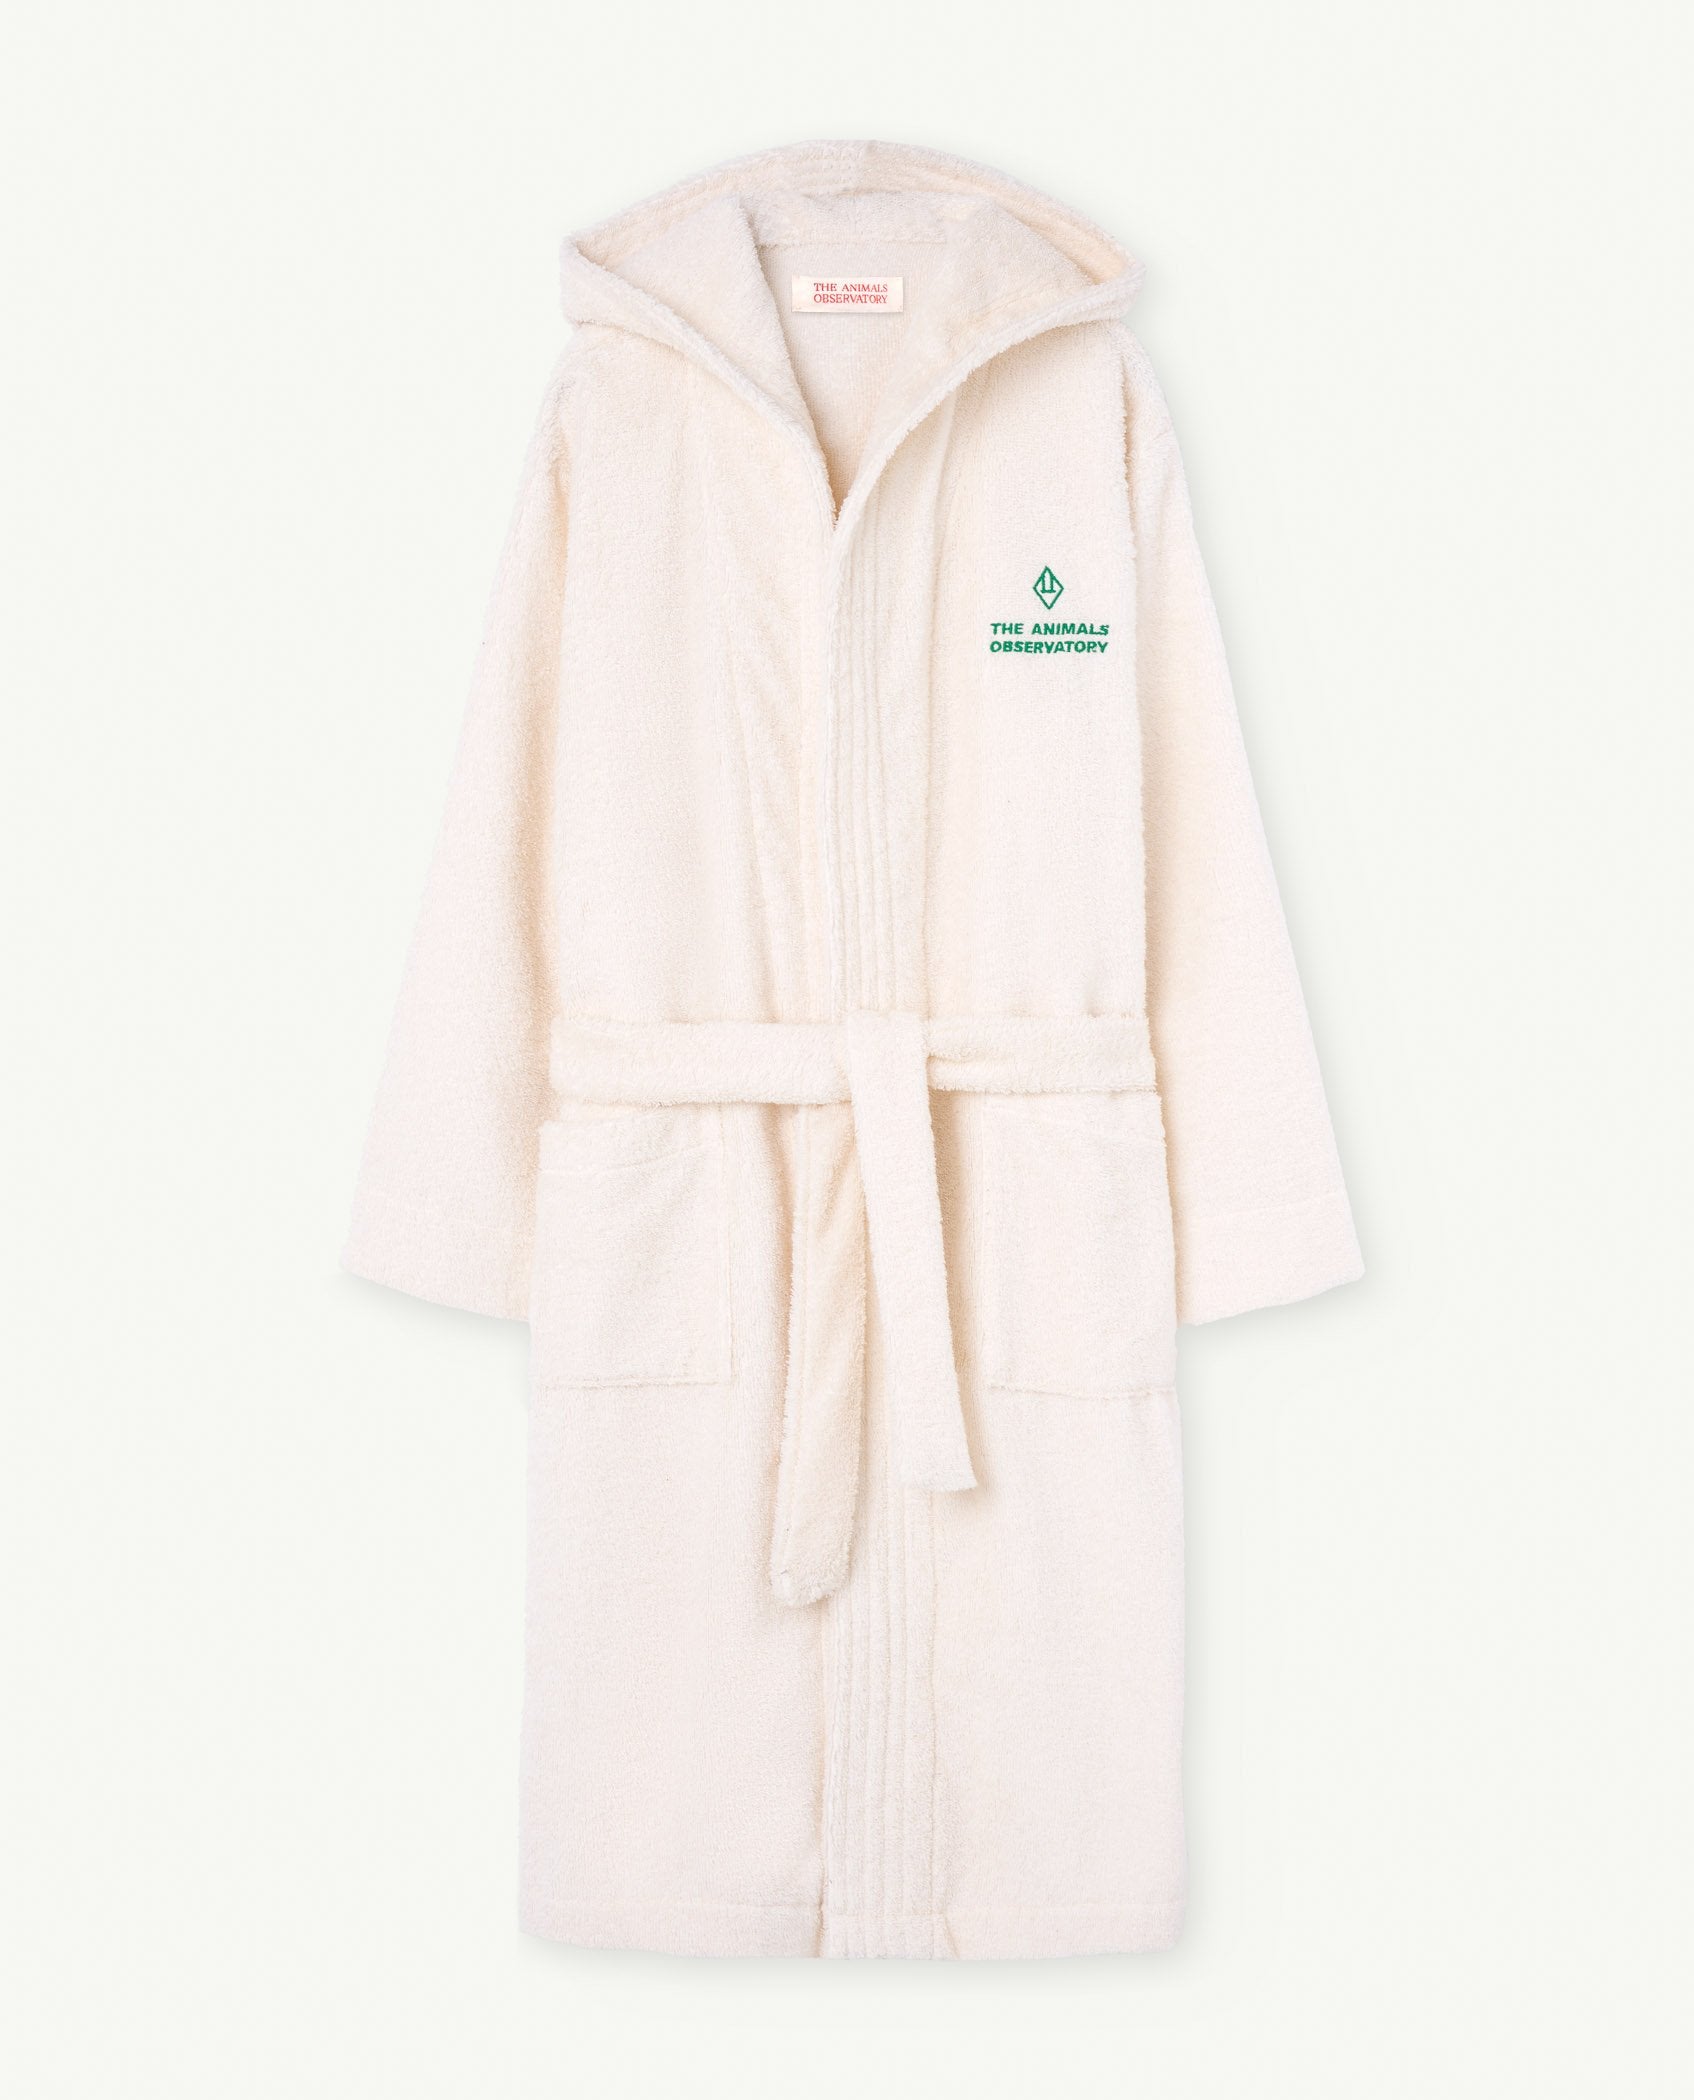 White Virgo Woman Robe PRODUCT FRONT